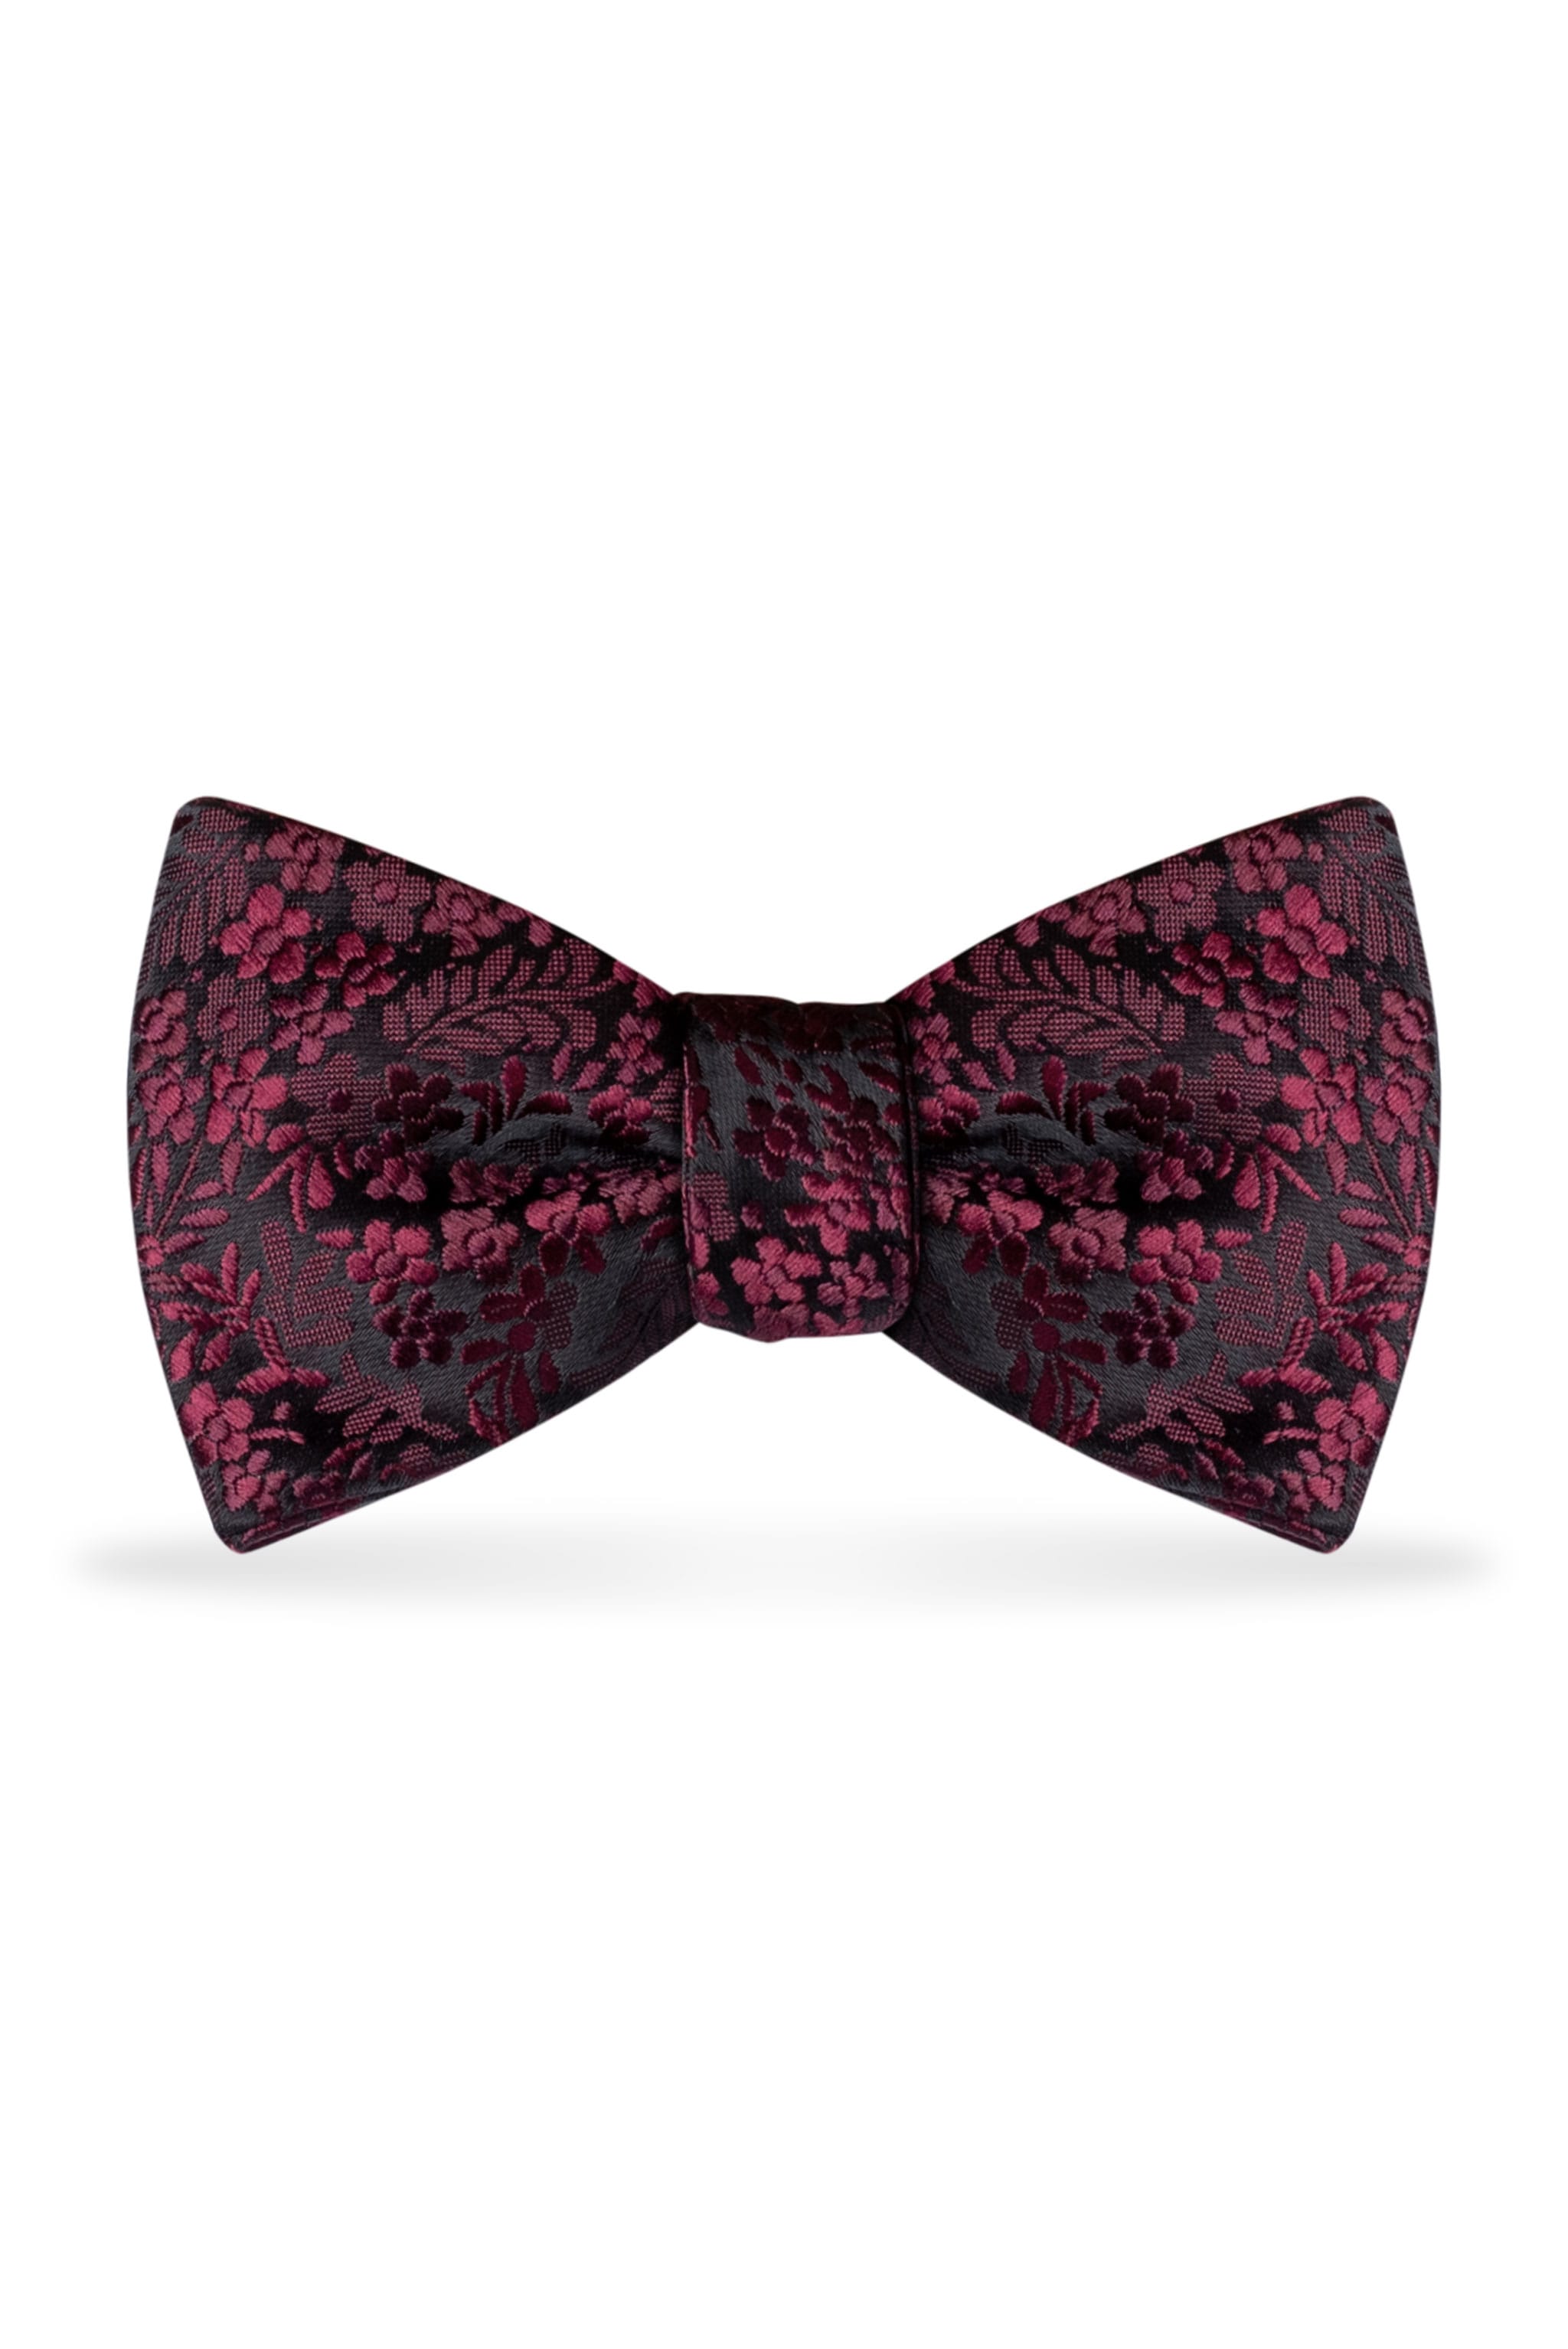 Floral Wine Bow Tie